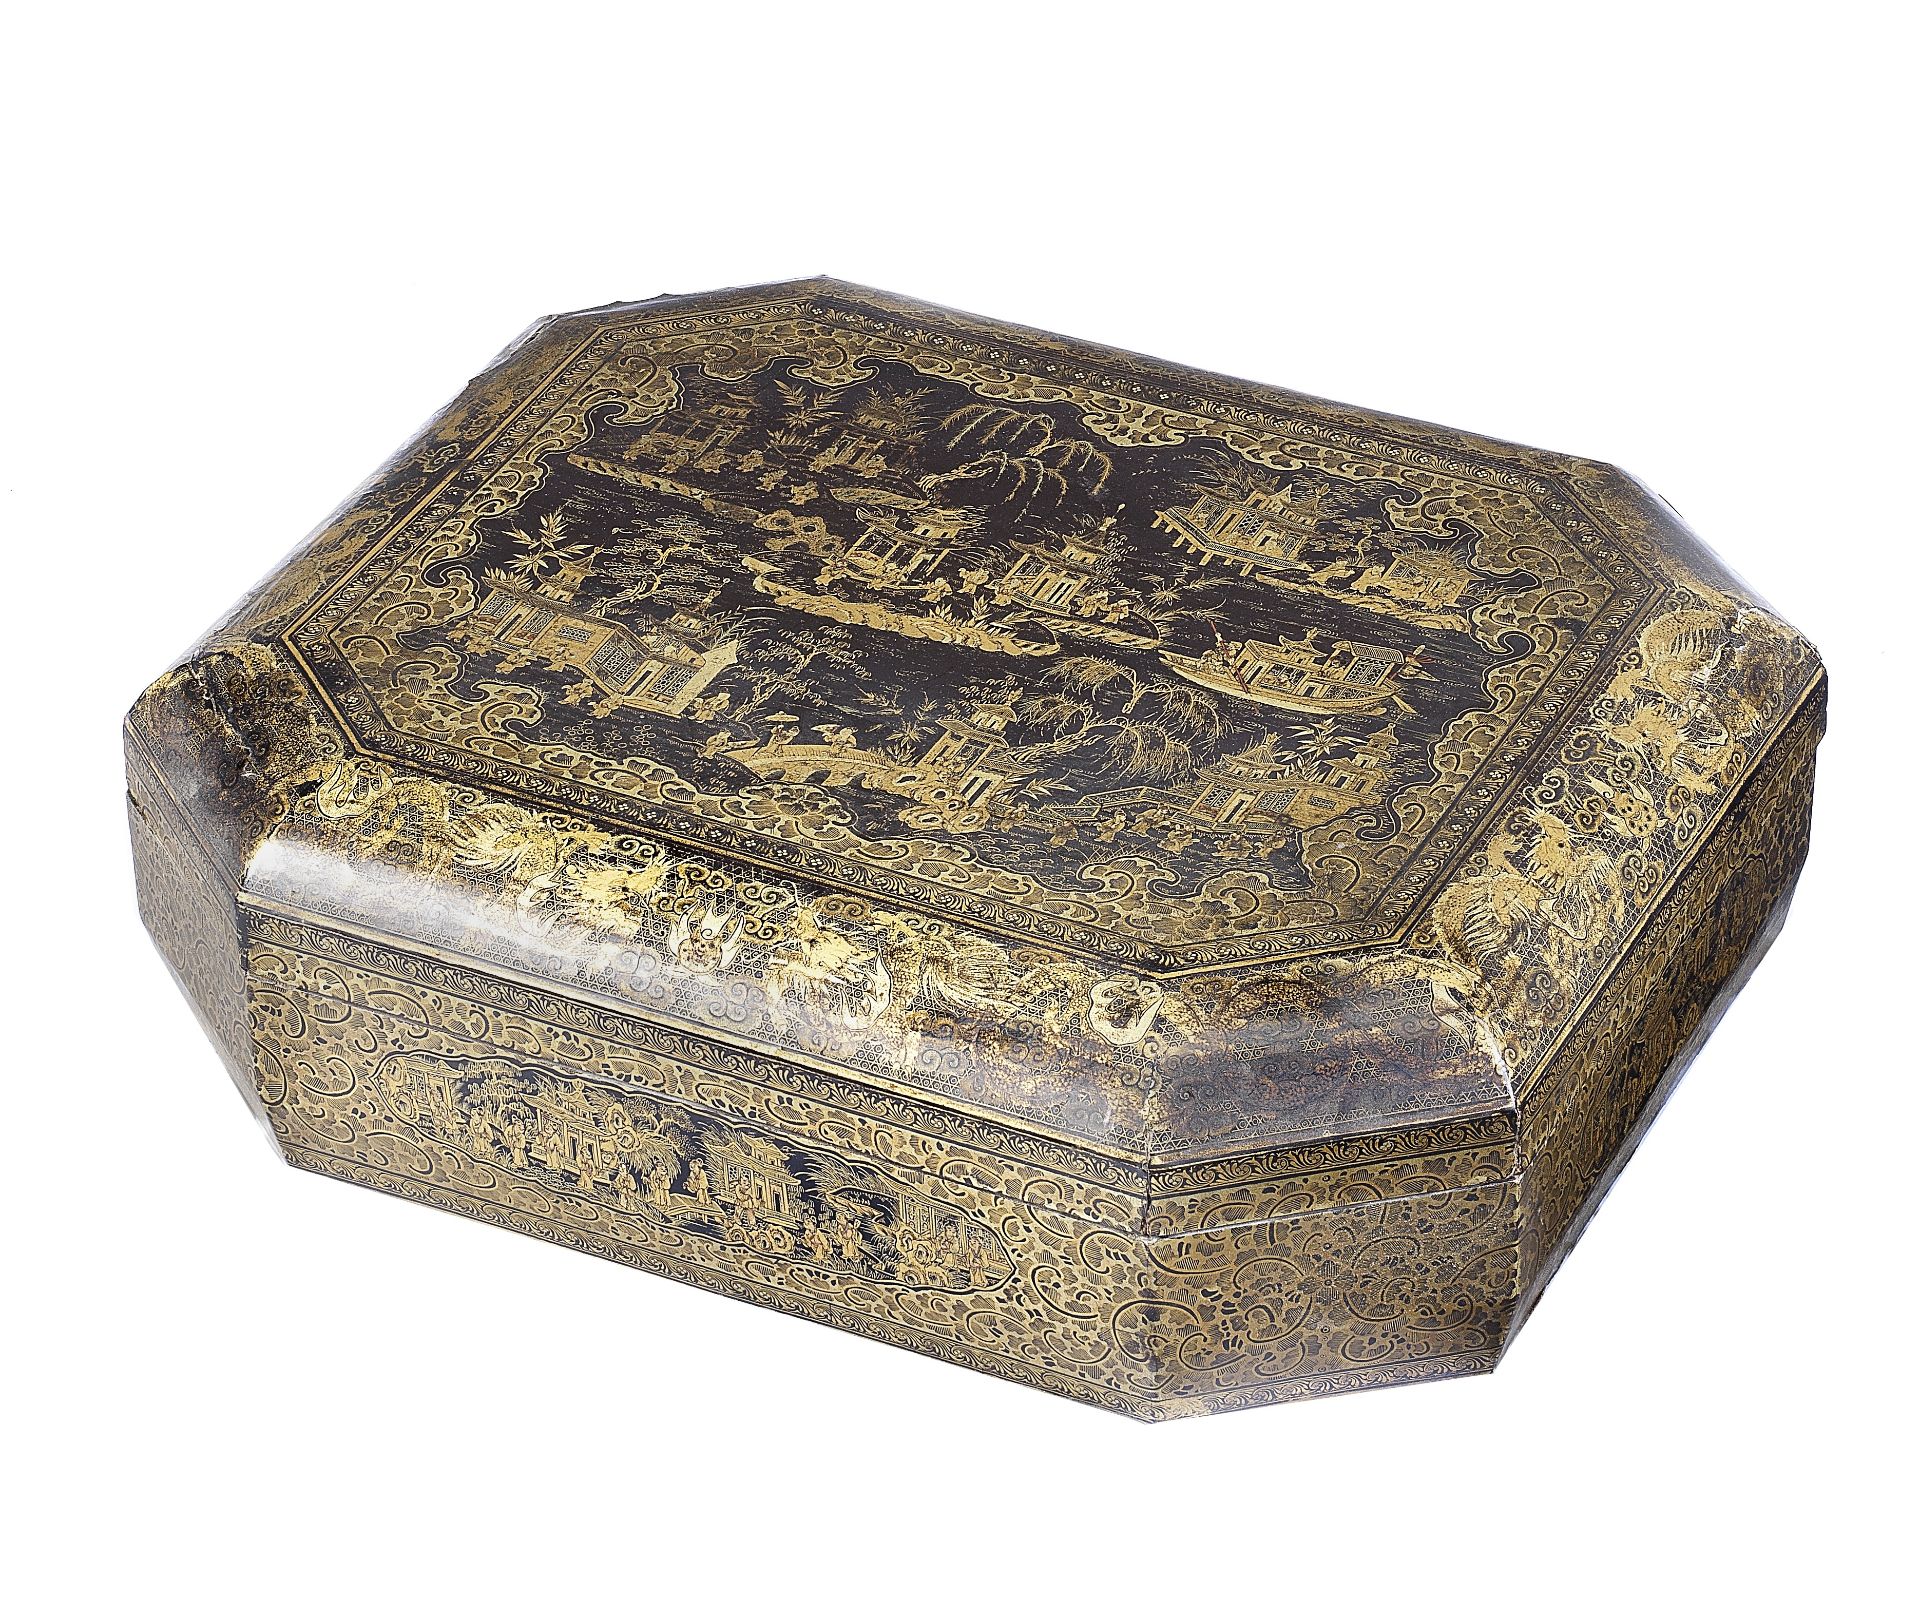 A 19th century Chinese Export gilt and black lacquered games box, containing a collection of simi...